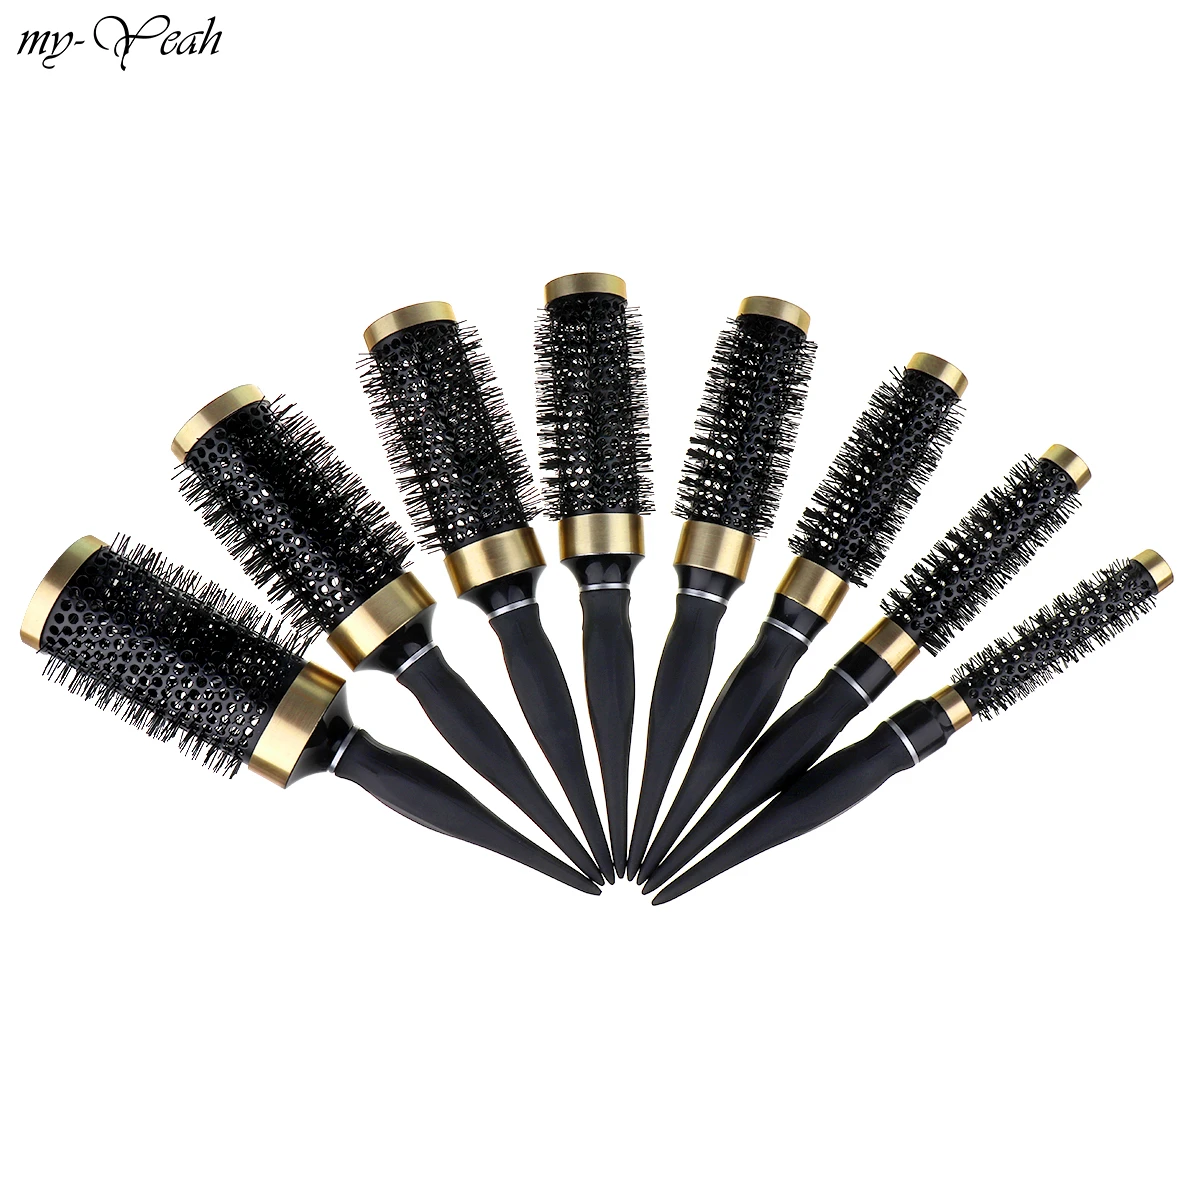 8 Size Iron Hair Brush Anti-Static High Temperature Resistant Round Barrel Hair Comb Drying Curling Barber Accessories DIY Home